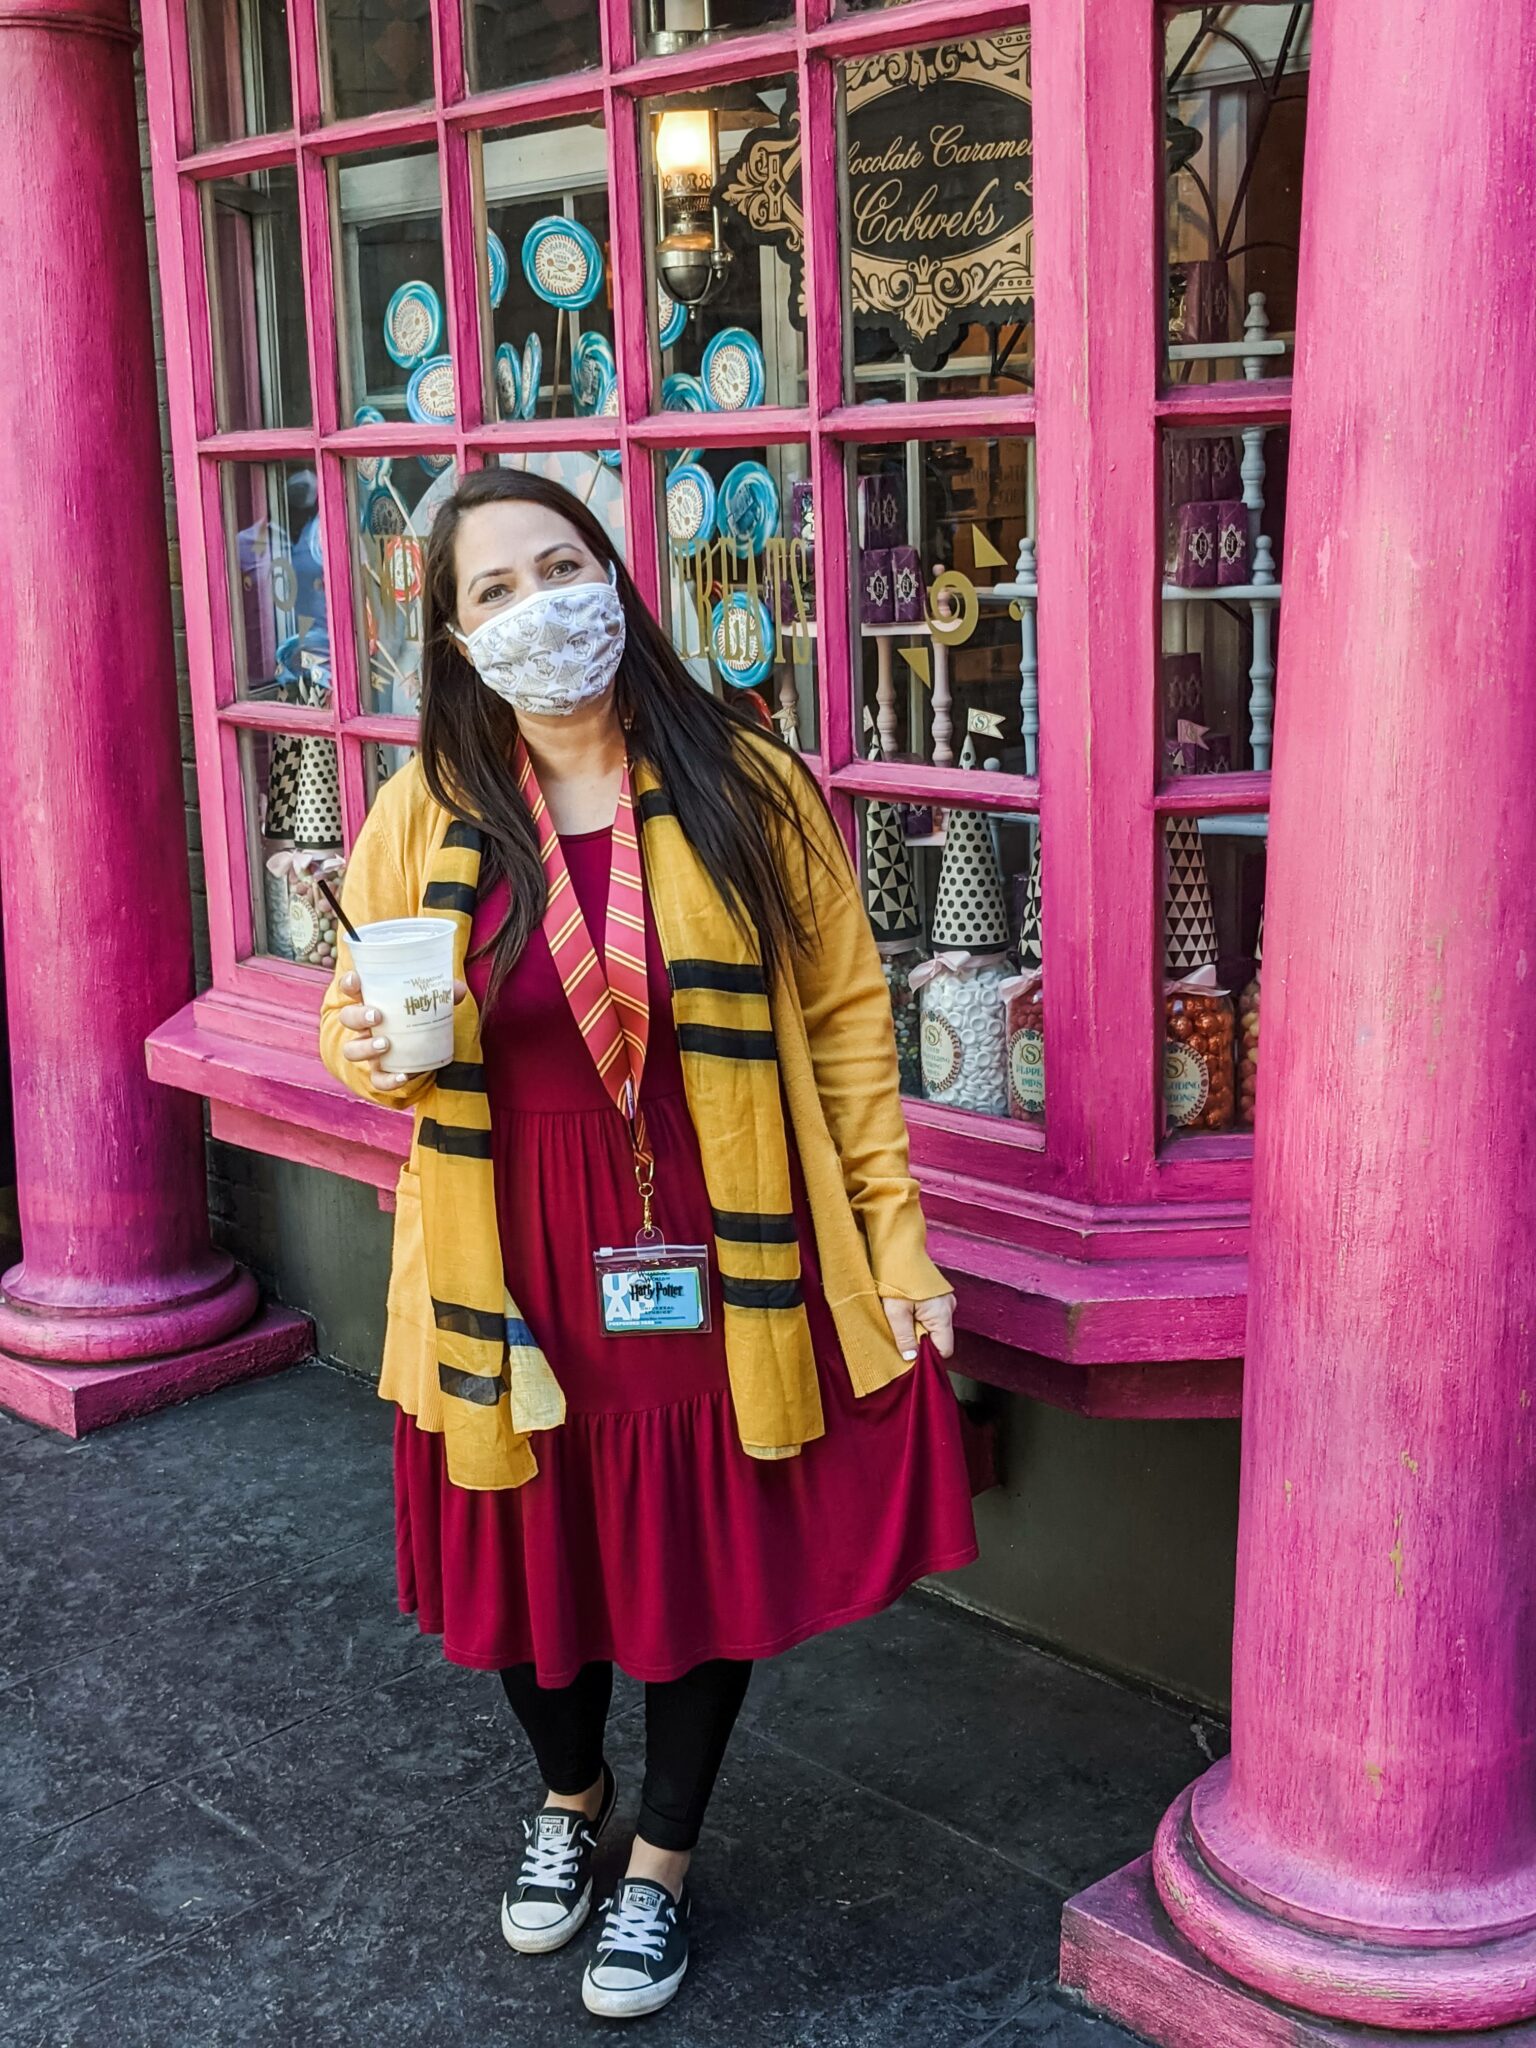 Best Photo Spots at Universal Studios Florida All Things with Purpose Sarah Lemp 24